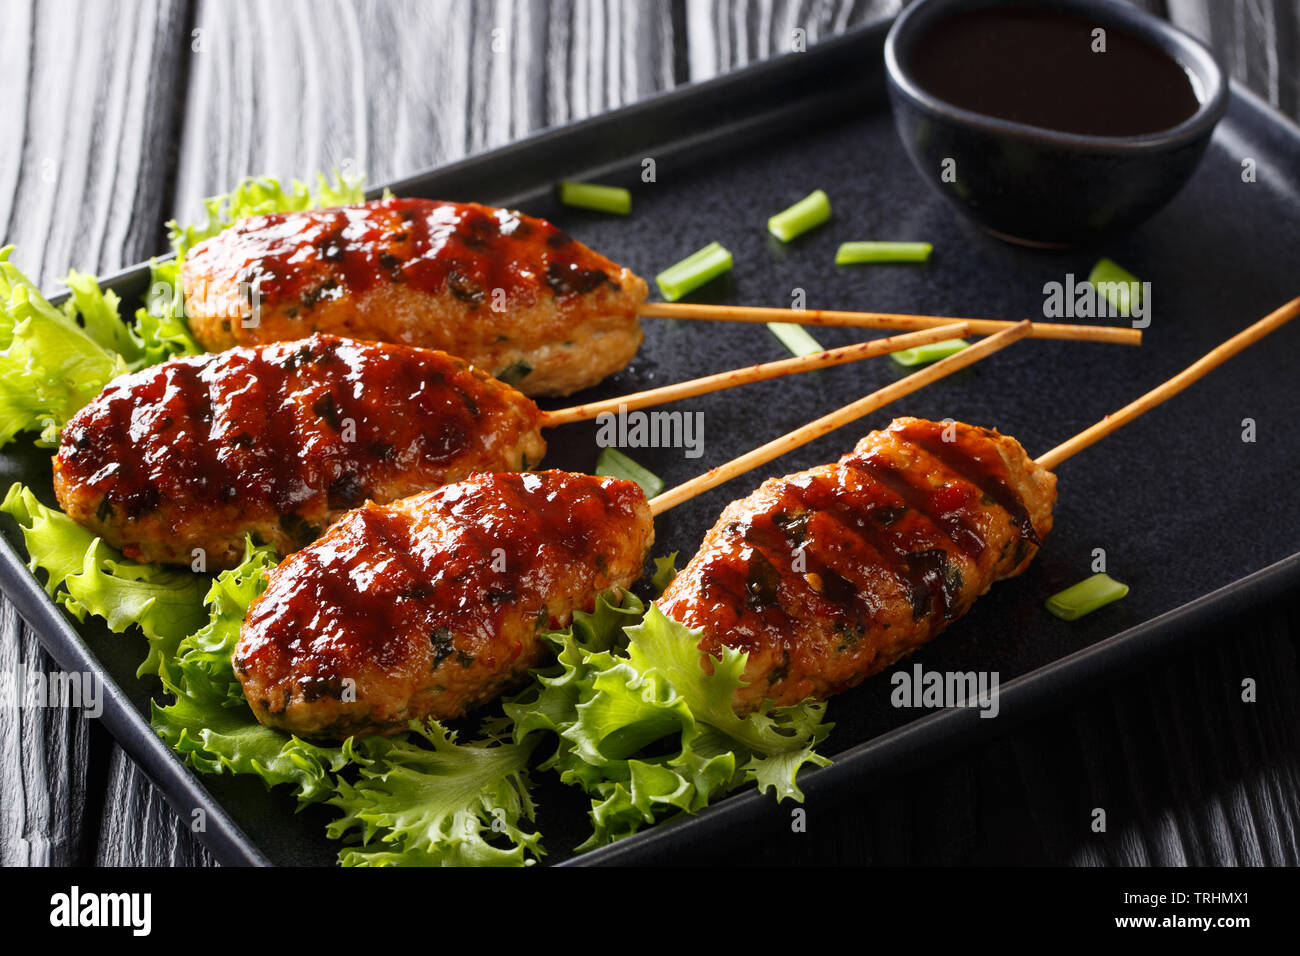 Tsukune Japanese chicken meatballs, skewered and typically grilled over charcoal close-up on a plate on the table. Horizontal Stock Photo